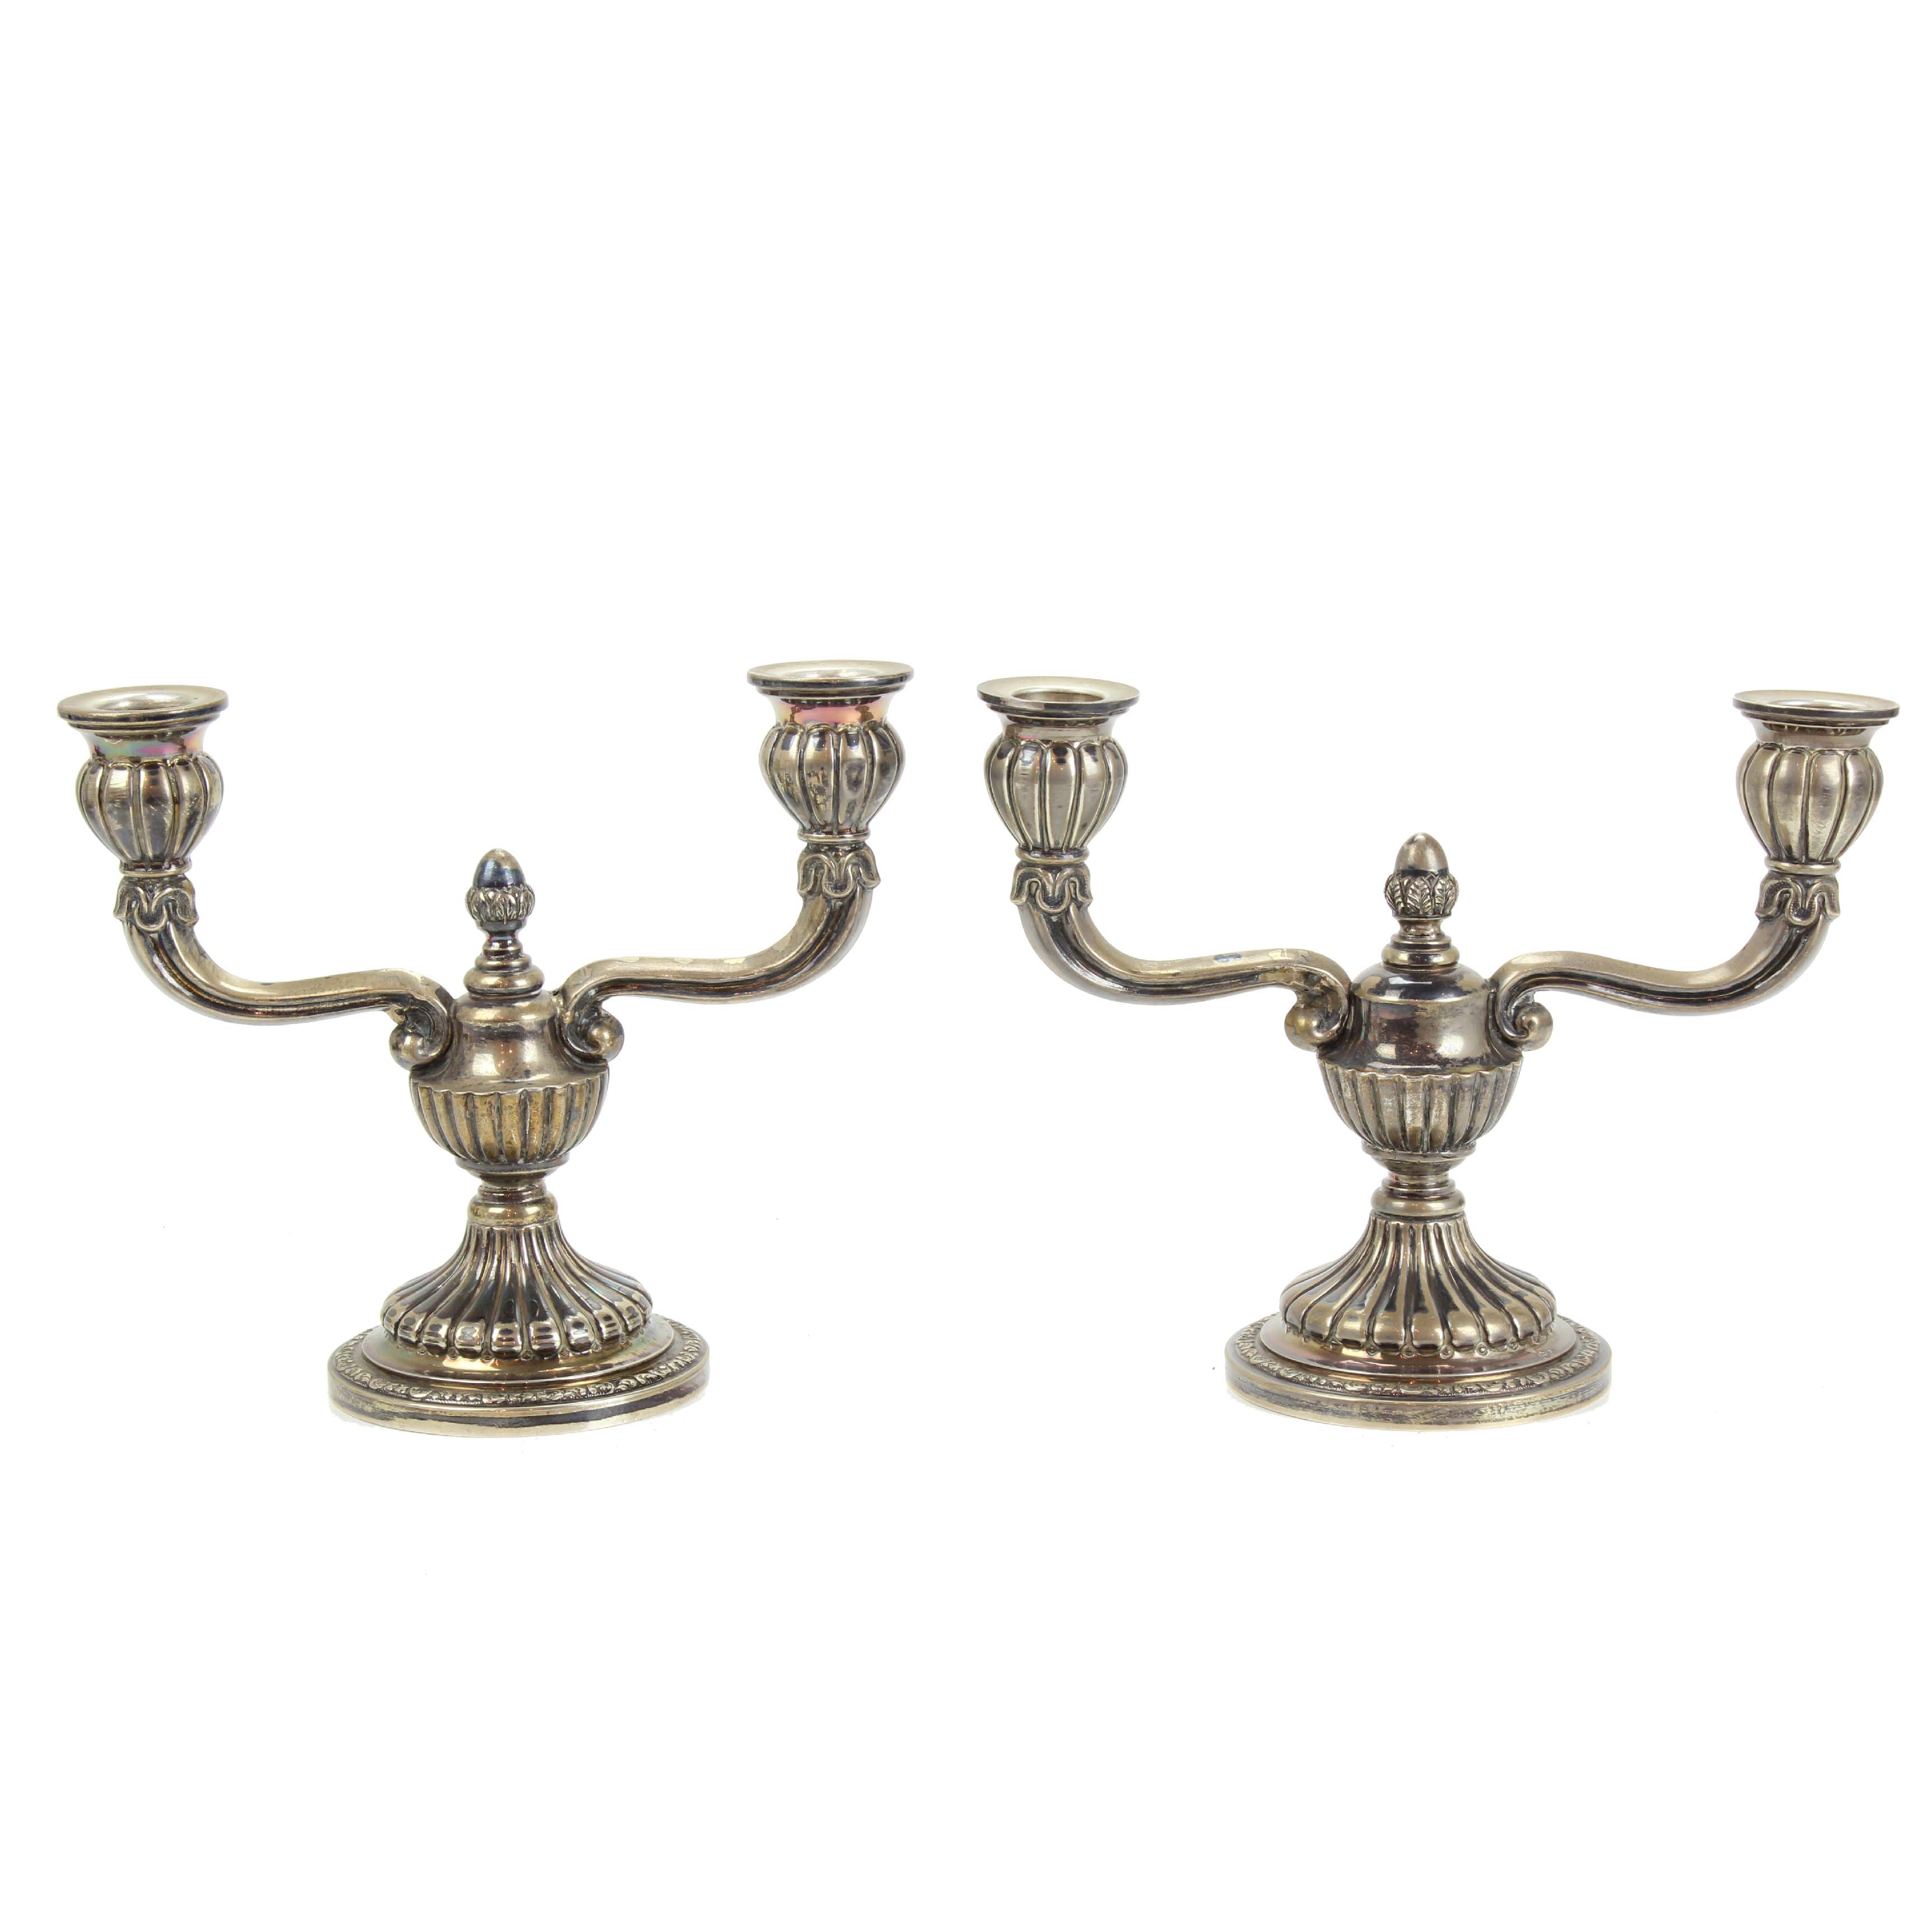 PAIR OF SPANISH SILVER  CANDELABRAS, MID C20th.